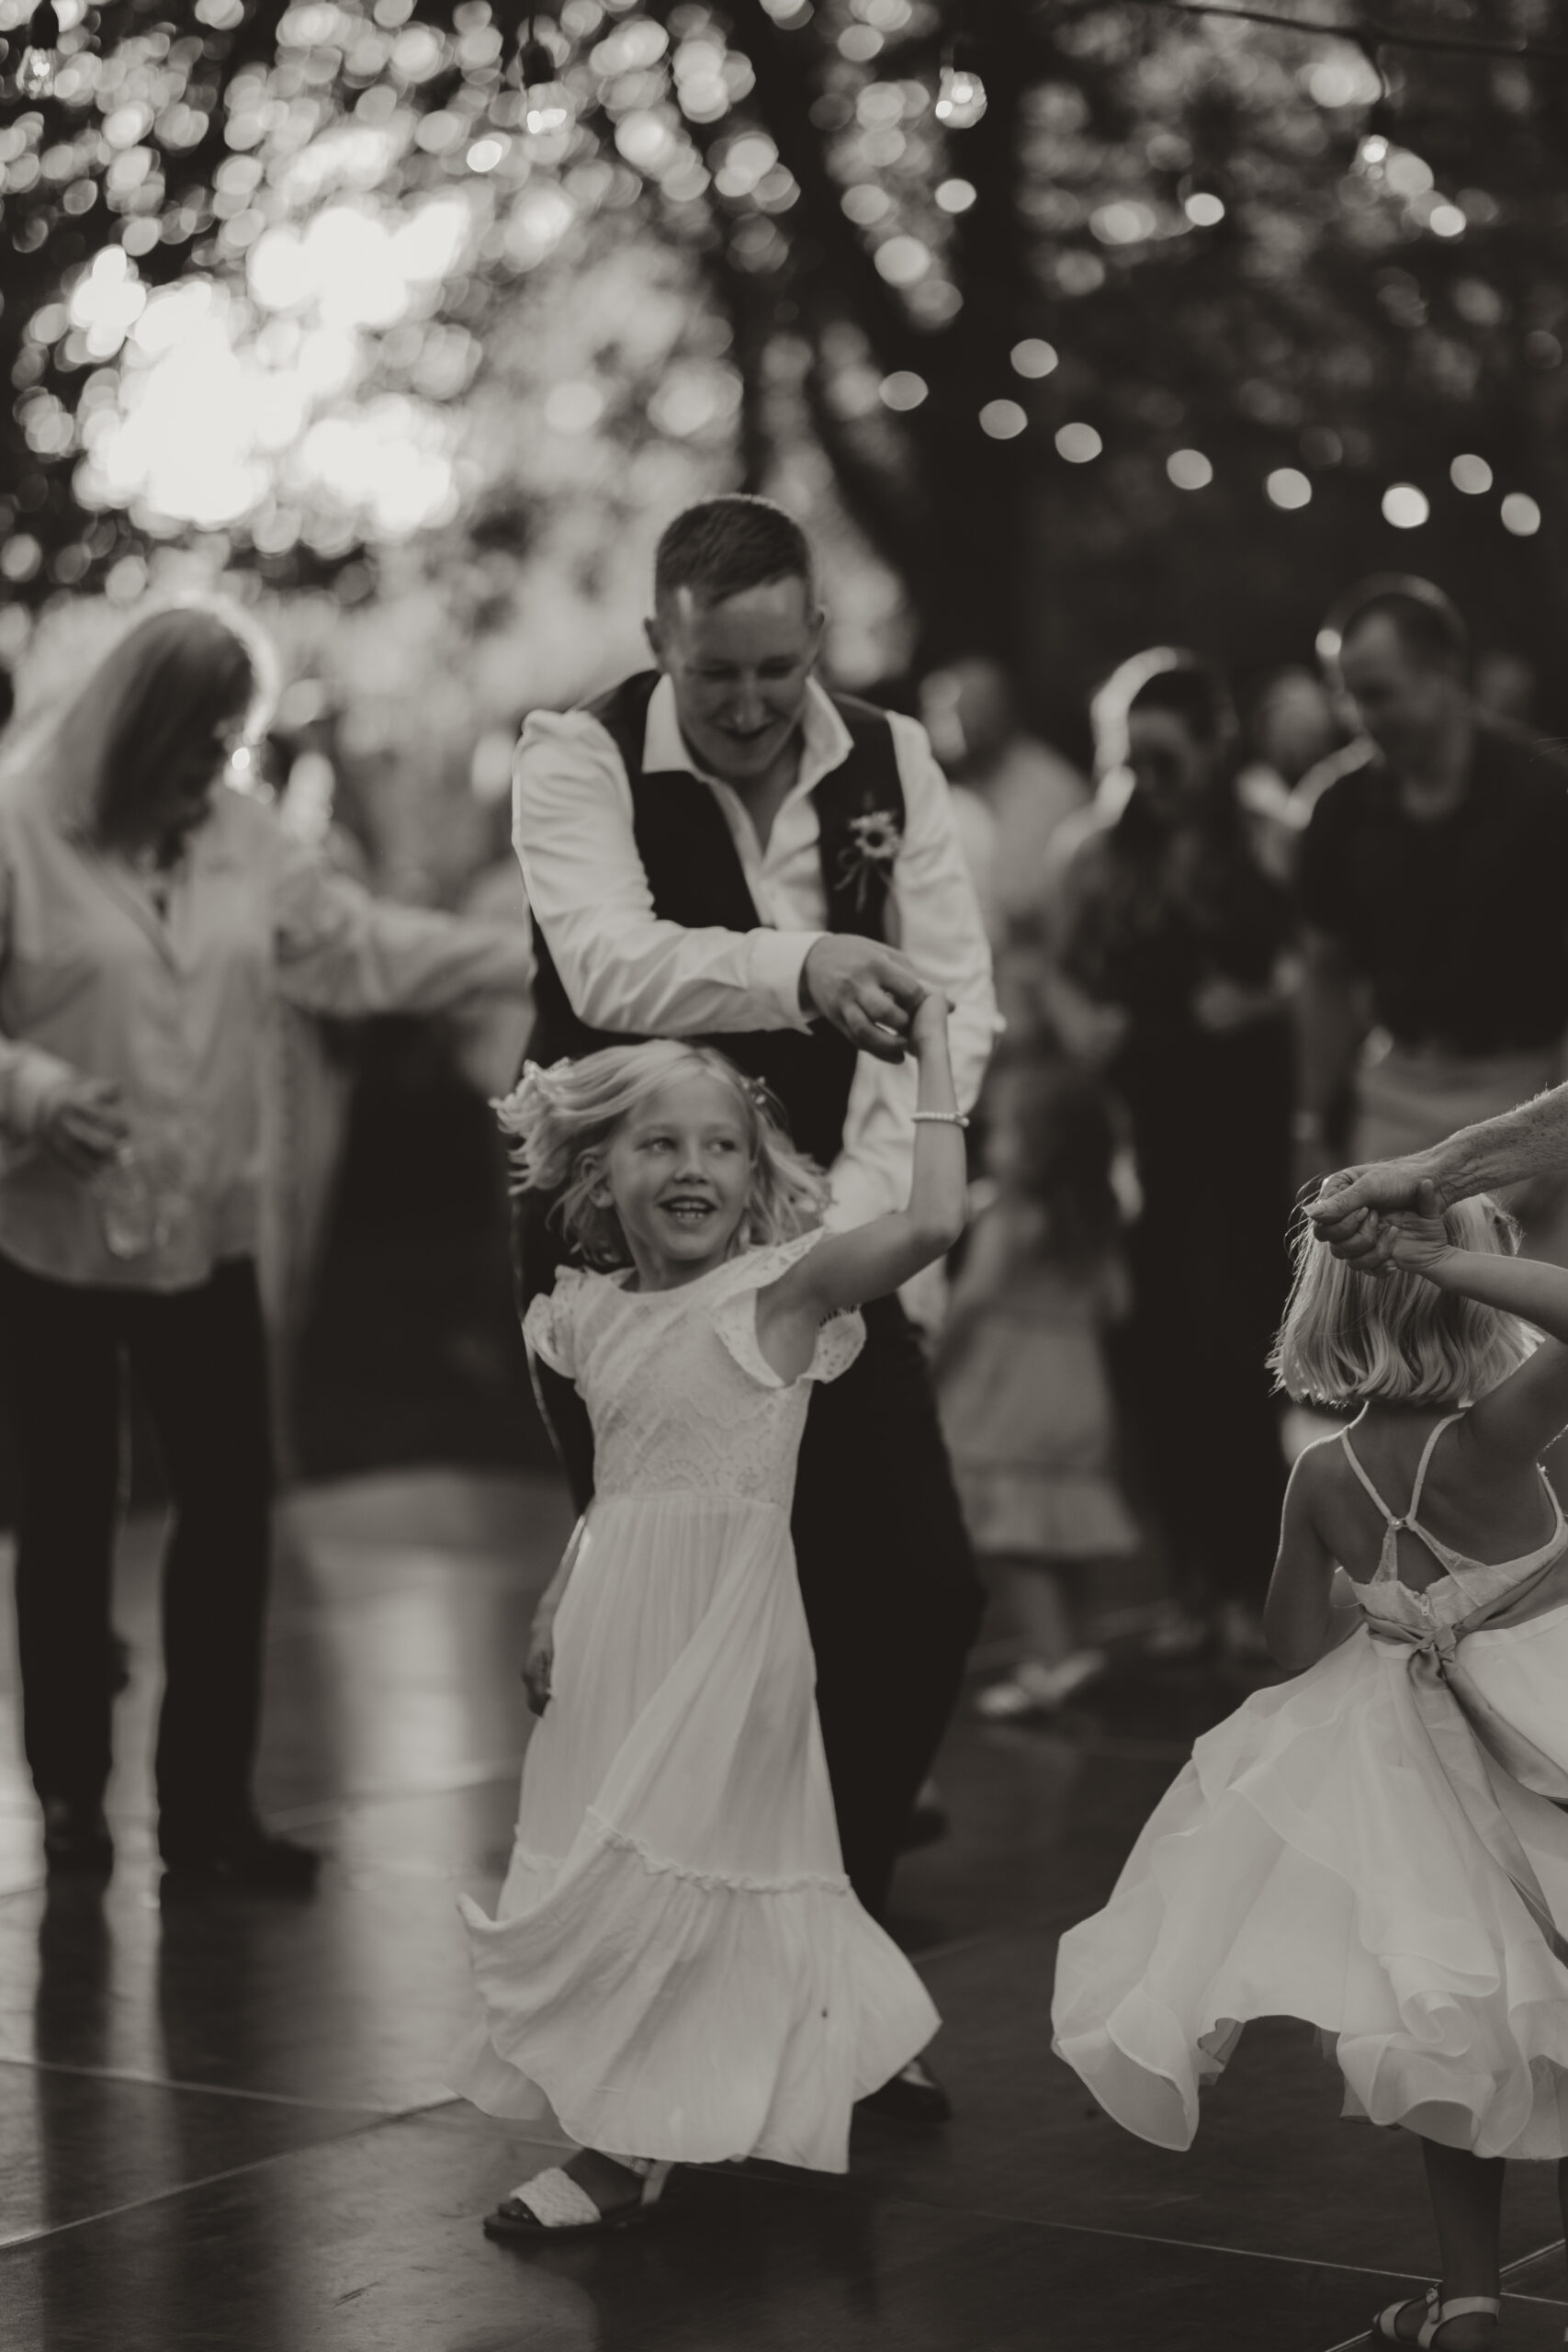 groom dancing with the flower girl at his wedding